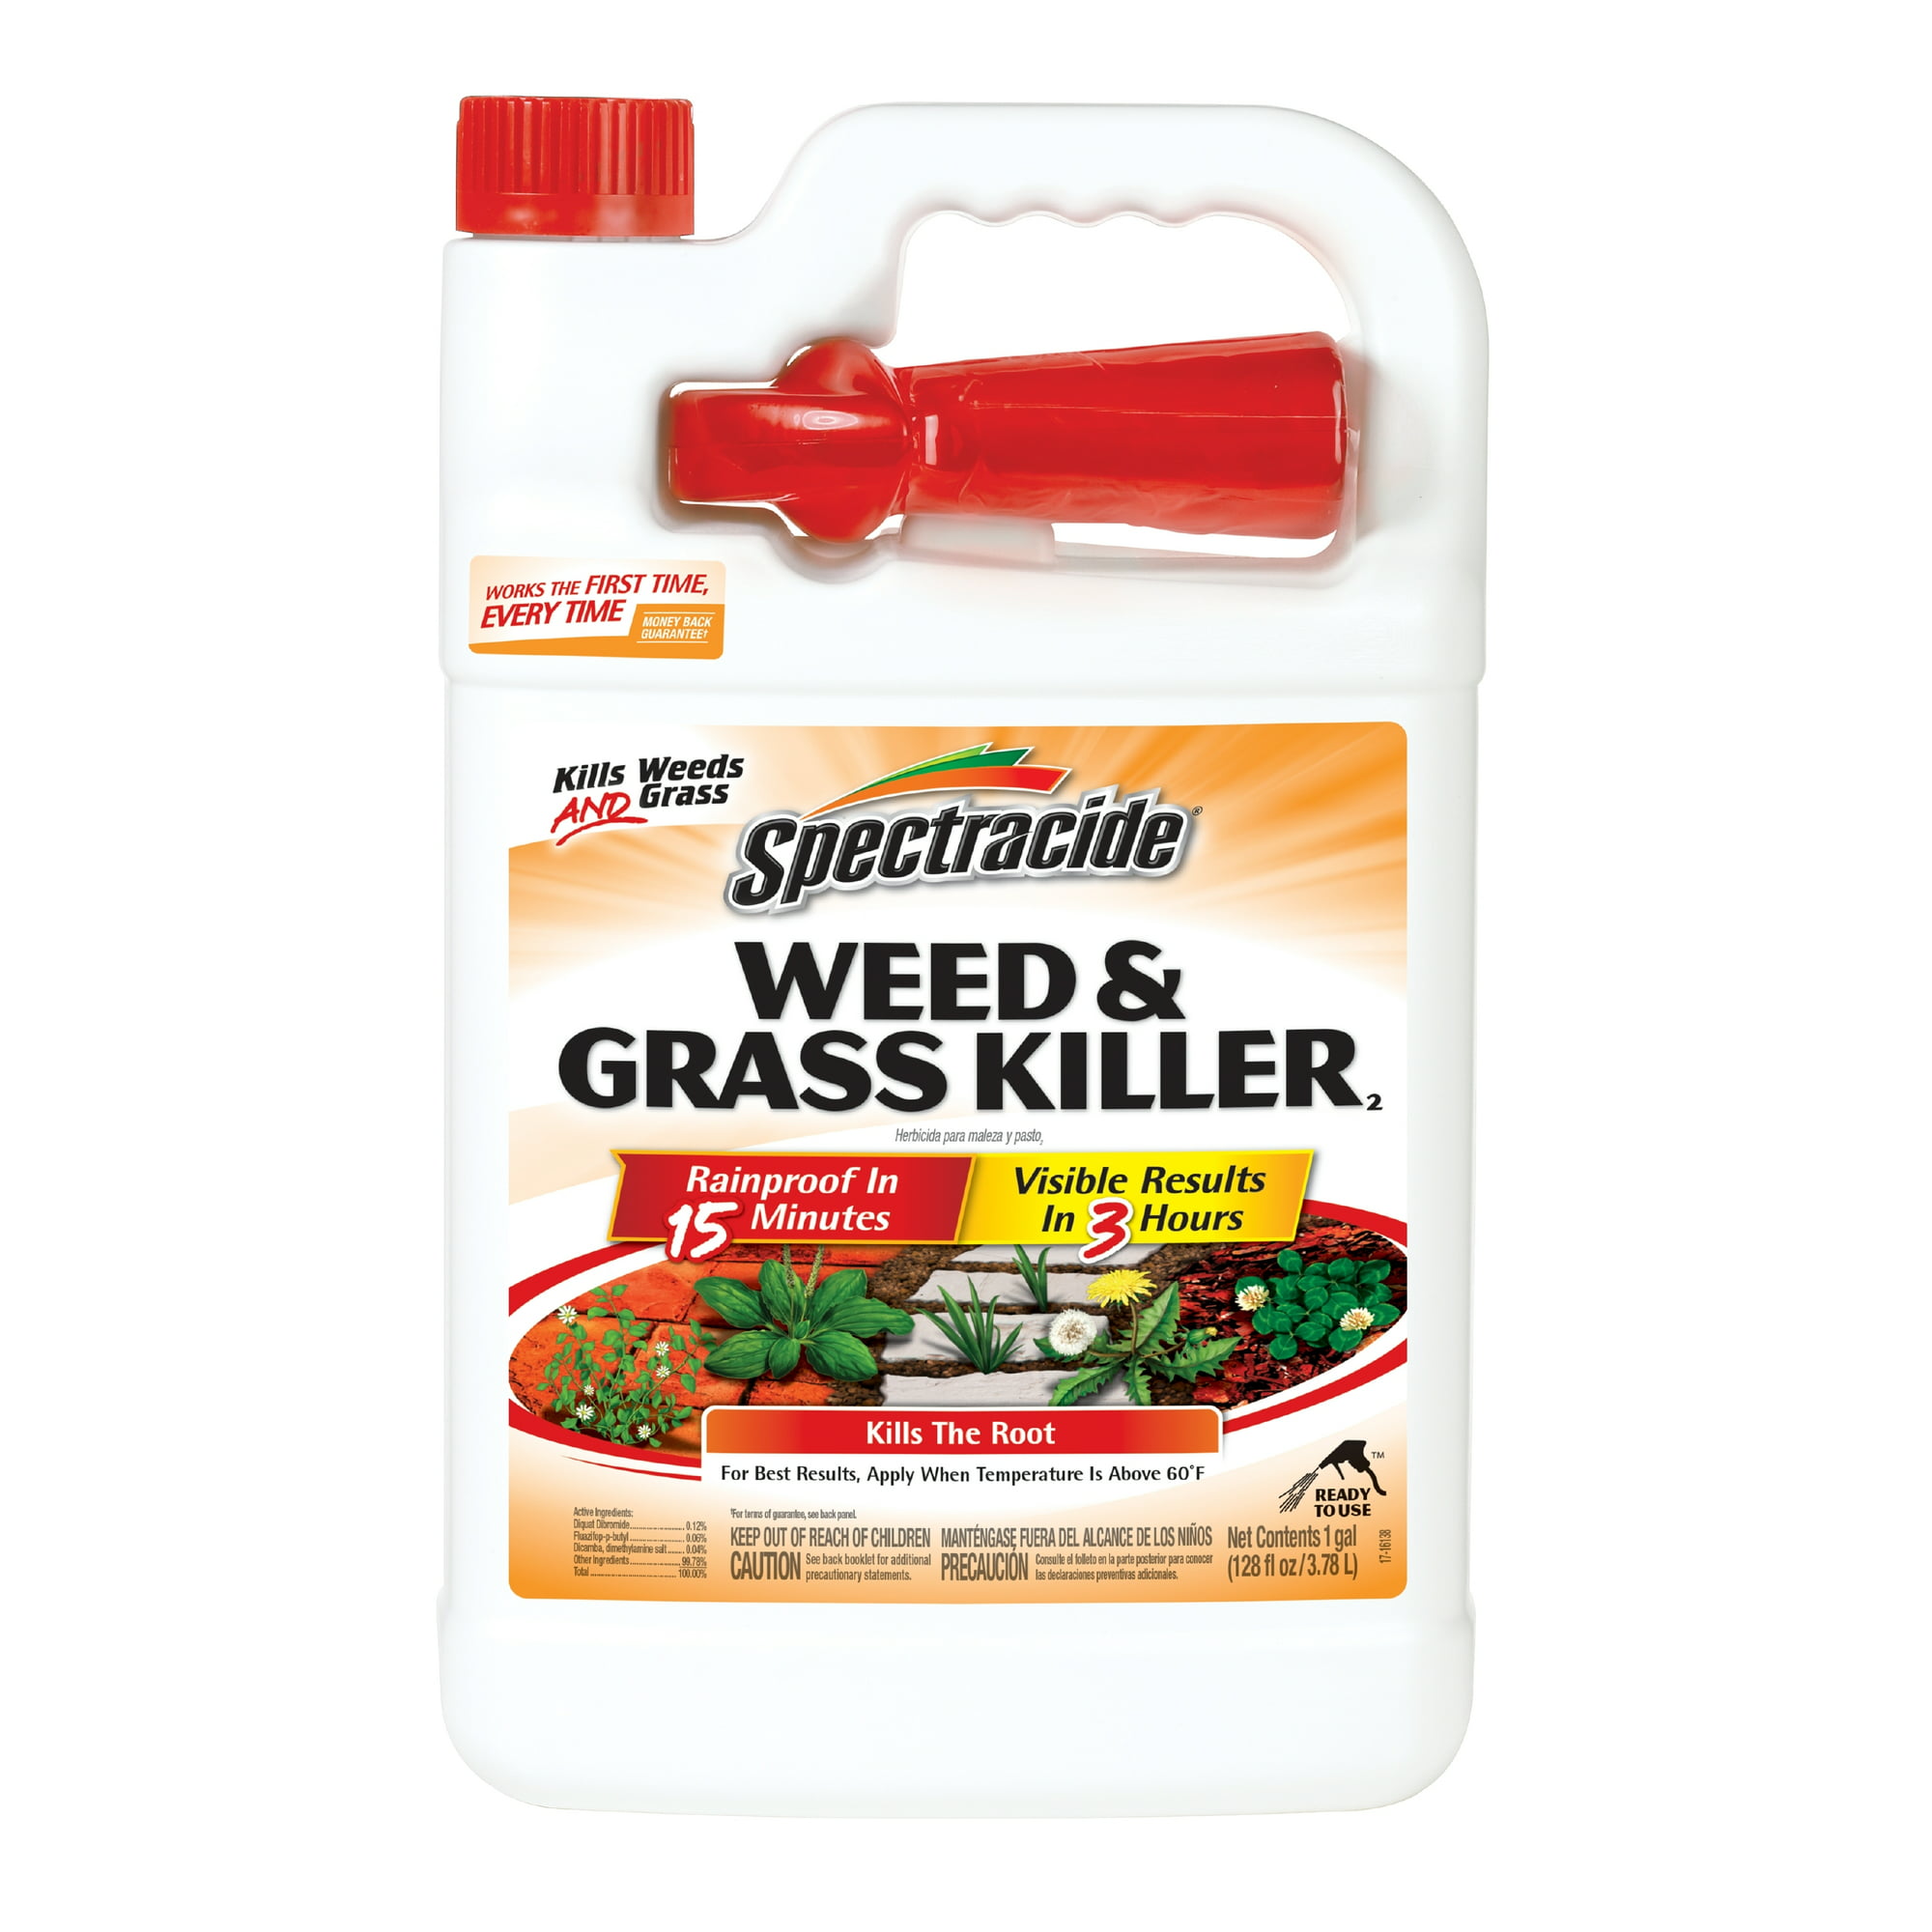 1-Gallon Spectracide Ready-to-Use Weed & Grass Killer $5.90 + Free shipping w/ Walmart+ or on orders $35+